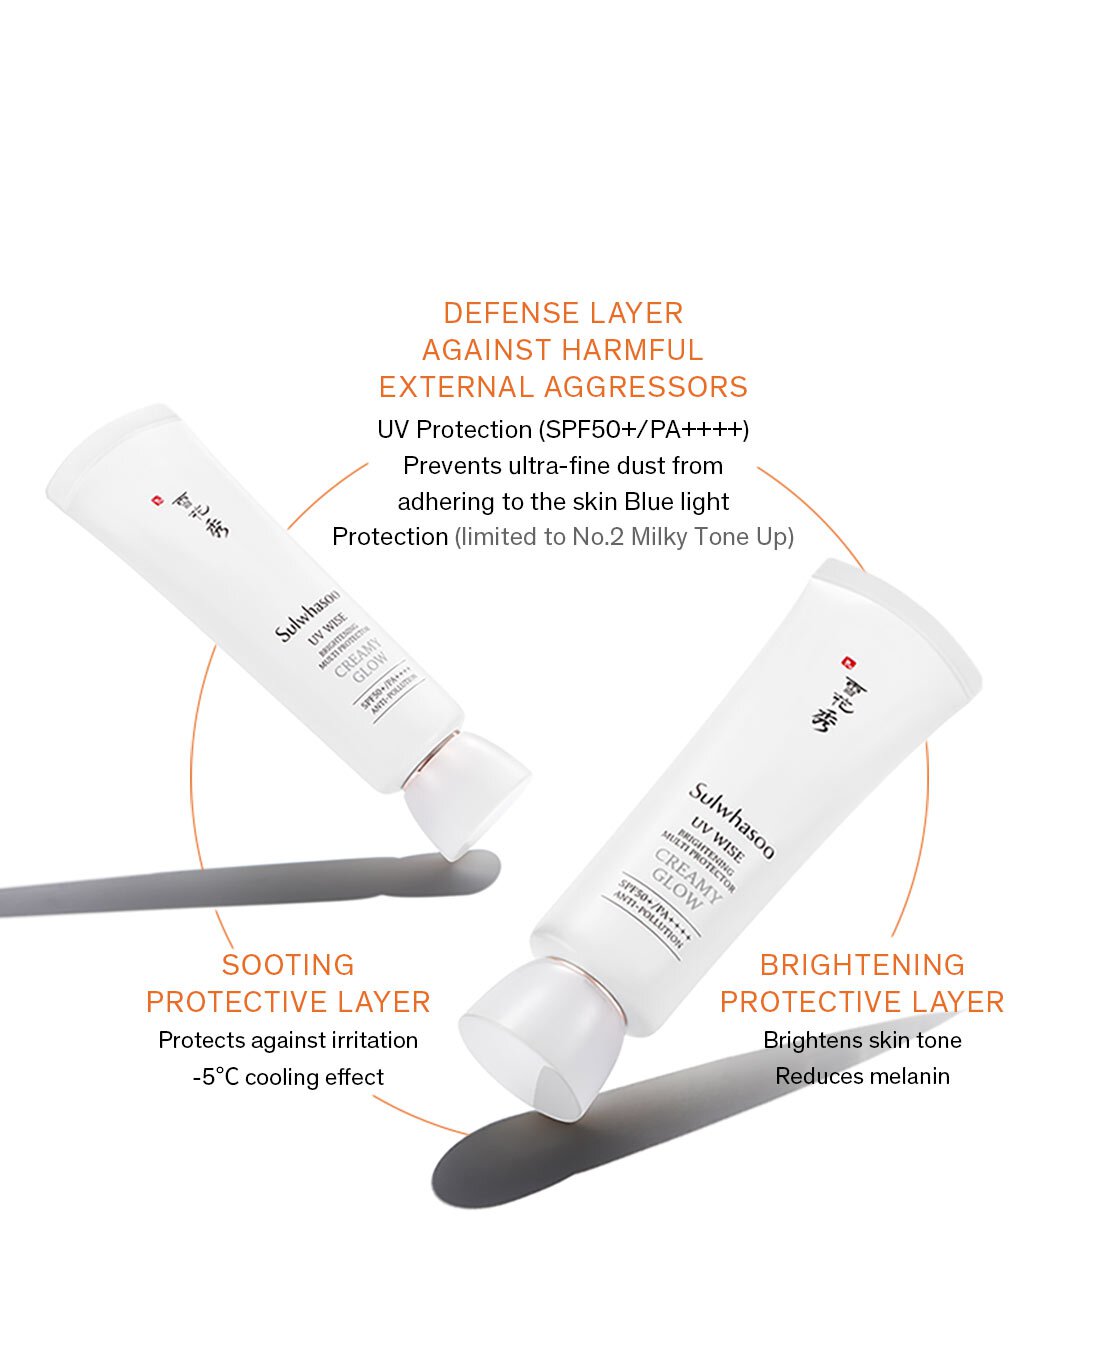 UV Wise Brightening Multi Protector’s TRIPLE-LAYER SKIN SHIELD for full protection against the harmful external aggressors with skin soothing and skin brightening properties